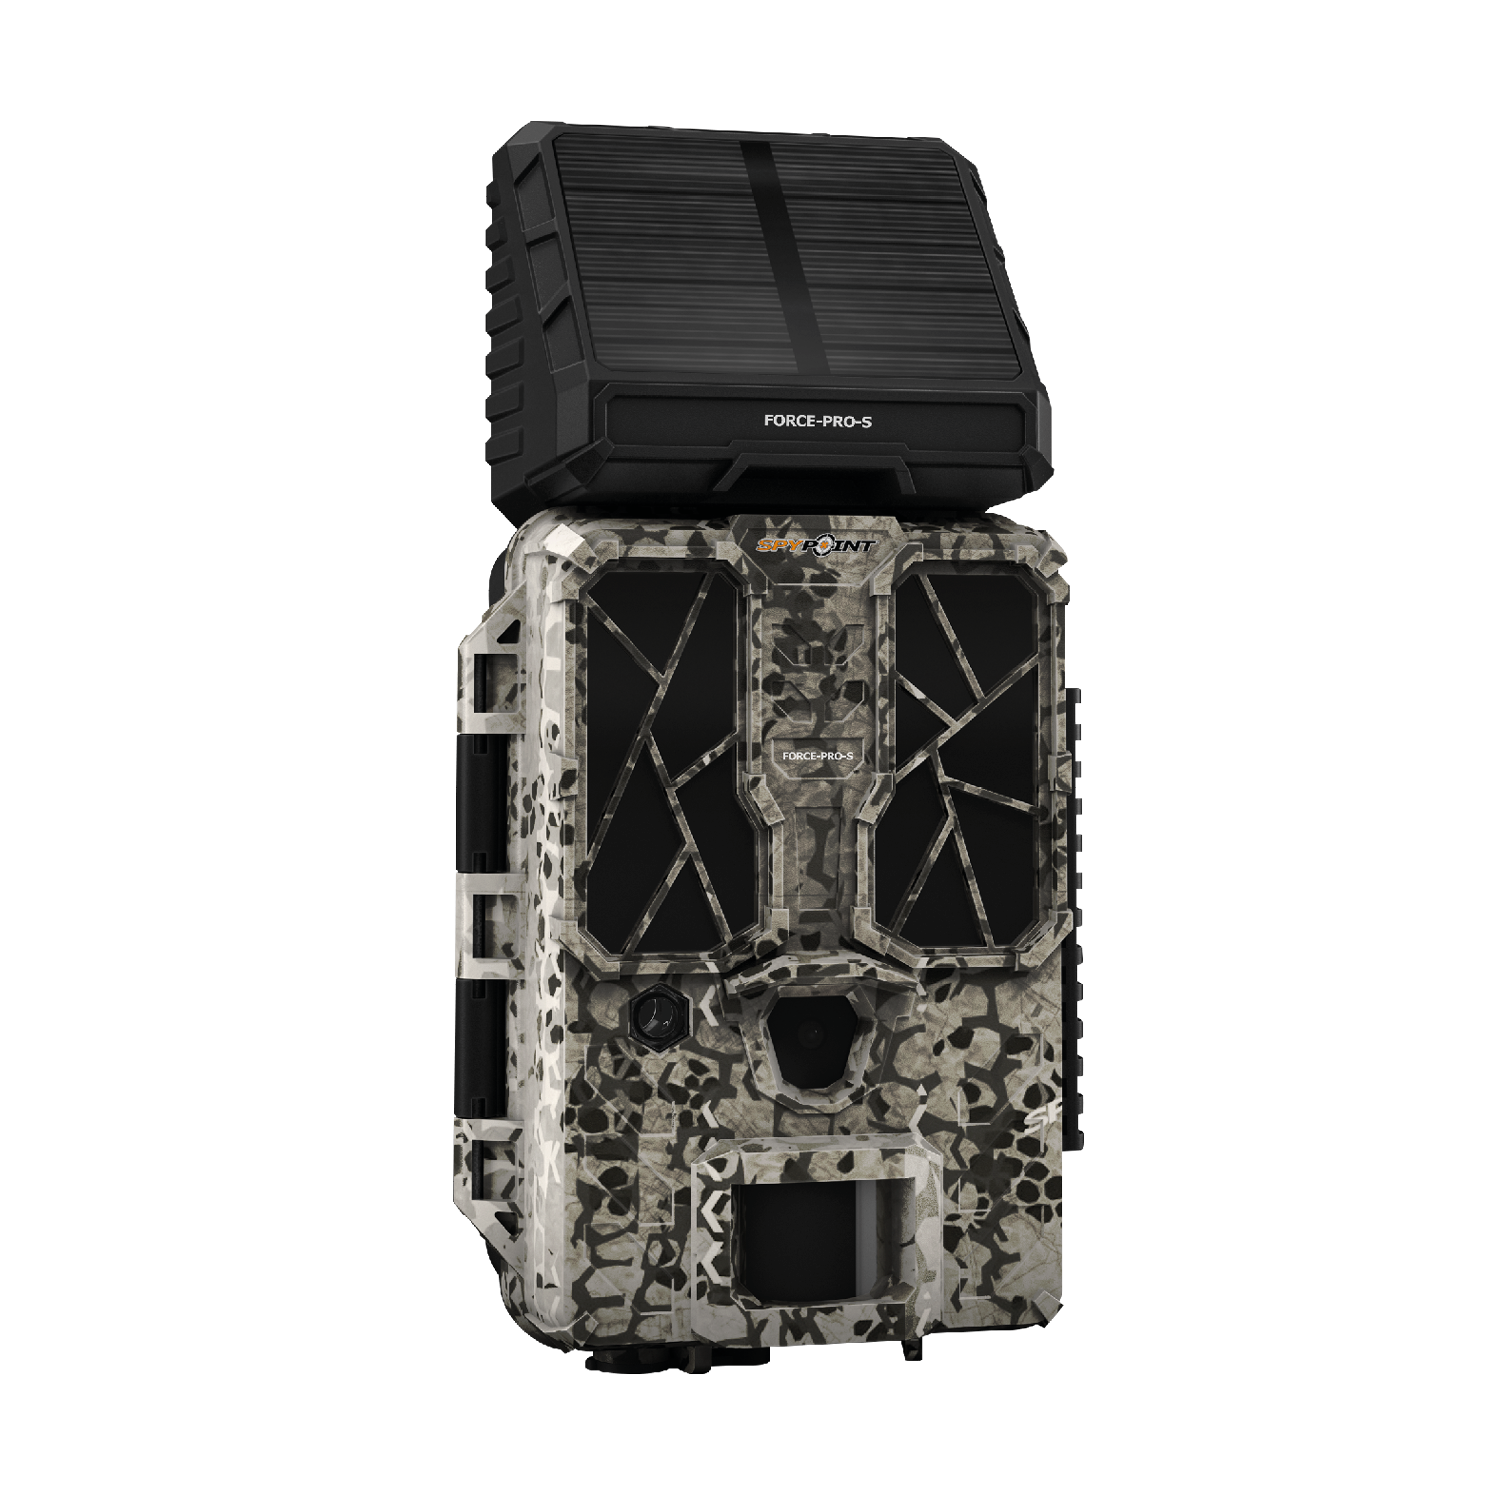 Spypoint FORCE-PRO-S Solar Trail Camera